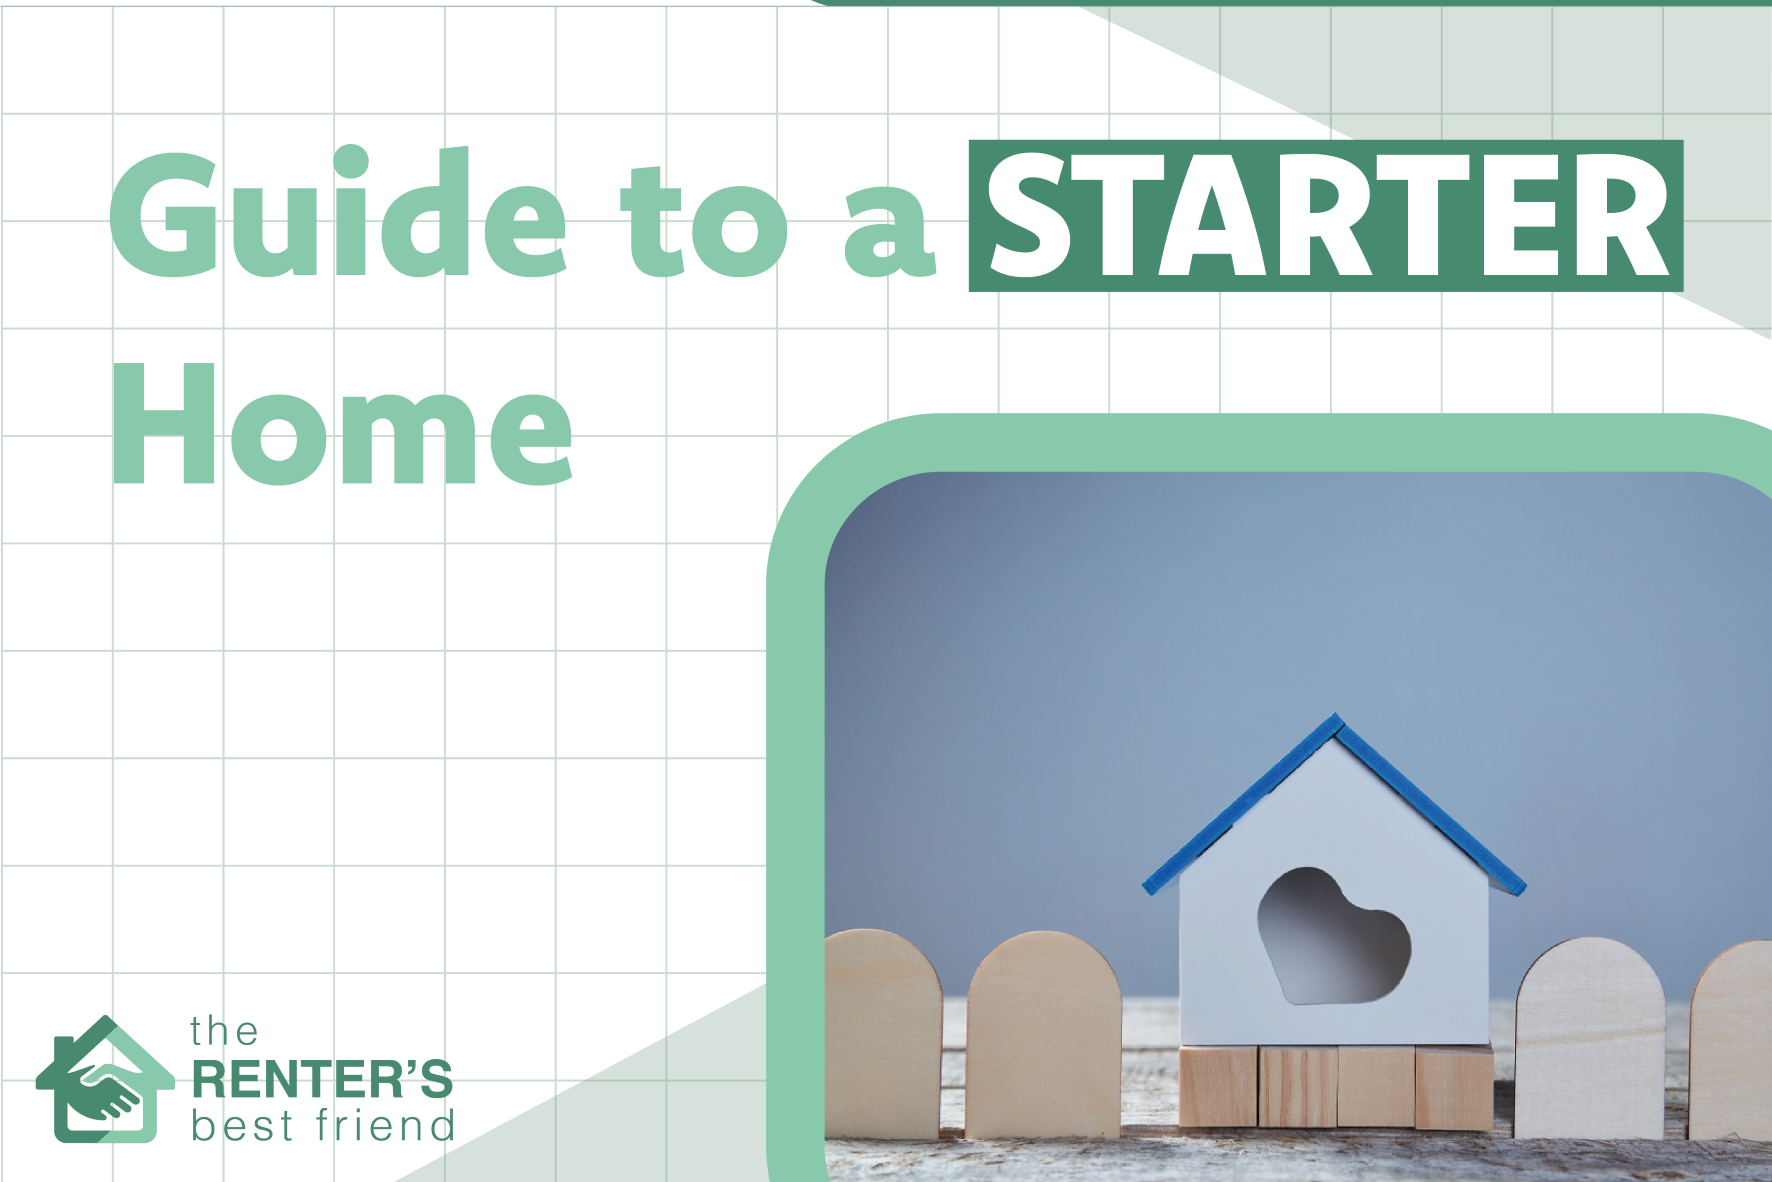 Guide to a starter home